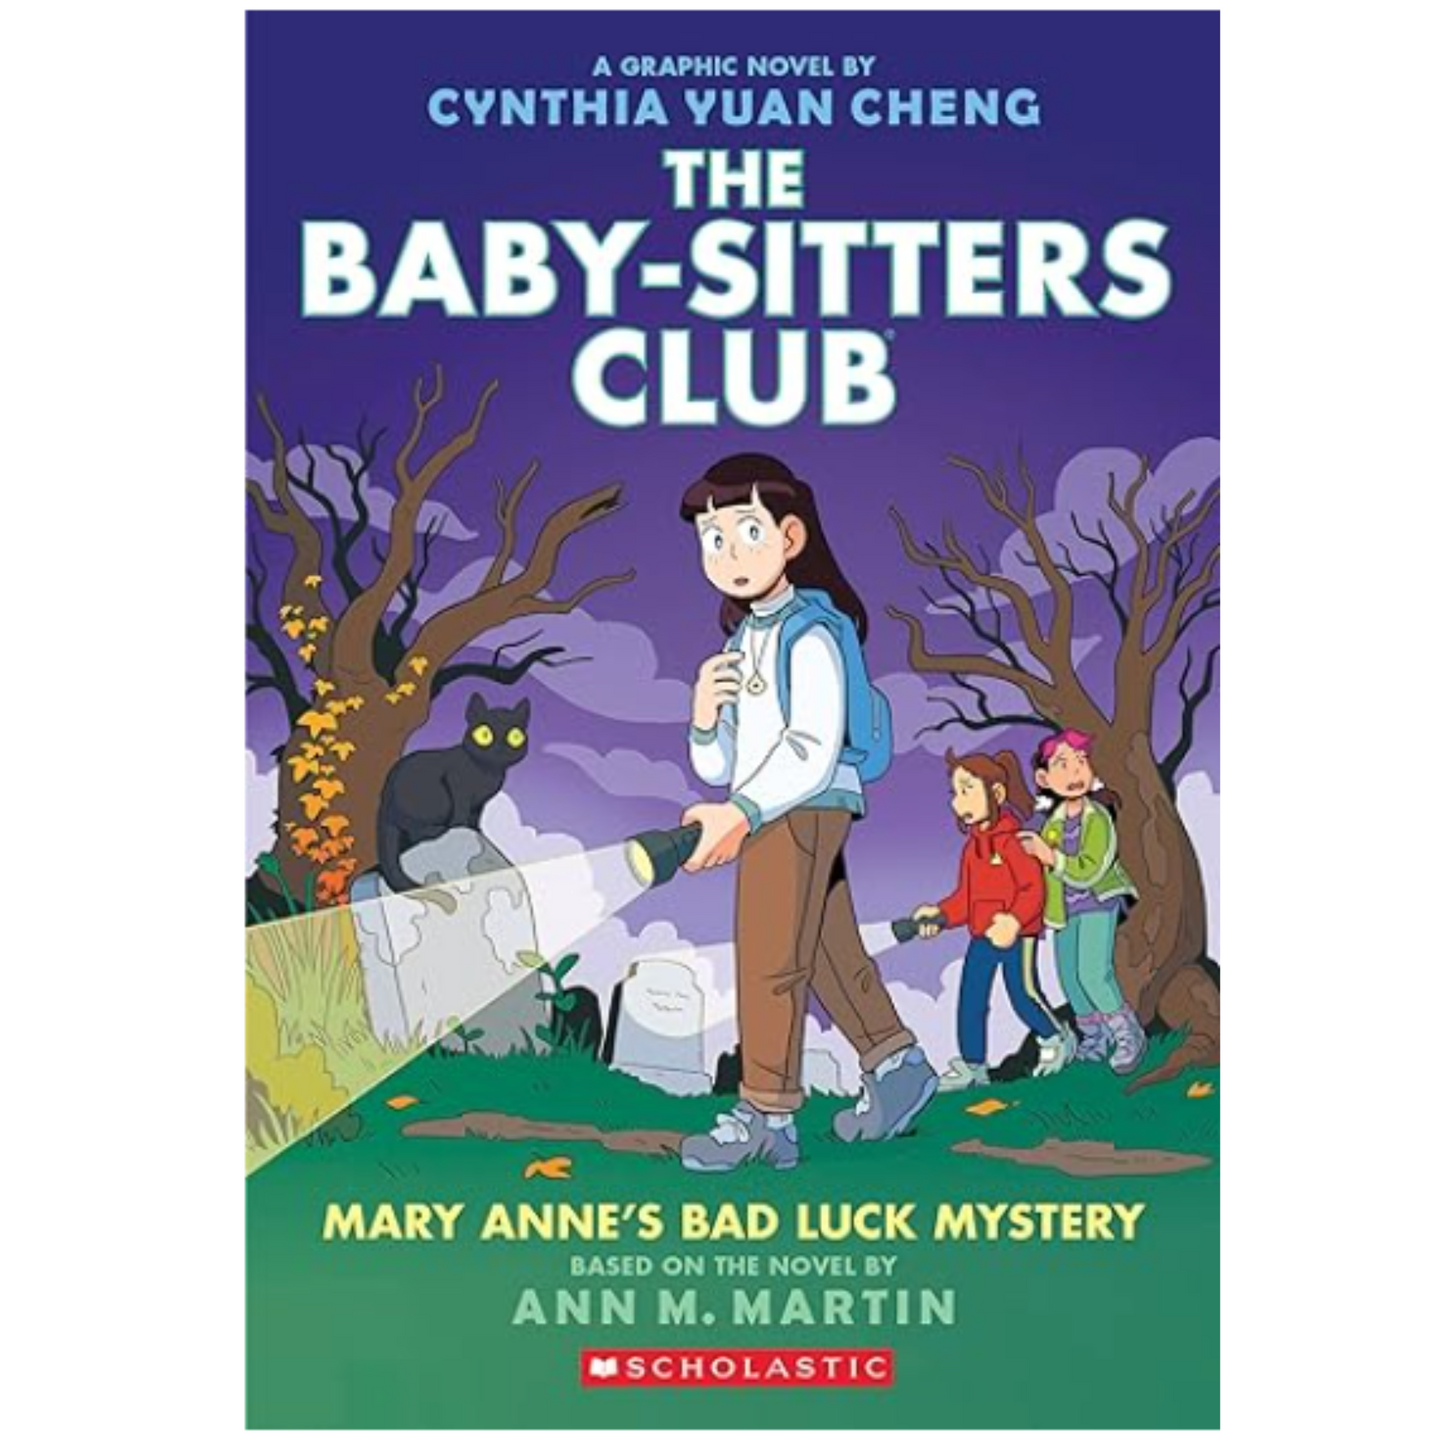 The Baby-Sitters Club Mary Anne's Bad Luck Mystery: A Graphic Novel (The Baby-Sitters Club #13) (The Baby-Sitters Club Graphix) Paperback Ð December 27, 2022by Ann M. Martin (Author), Cynthia Yuan Cheng (Illustrator)